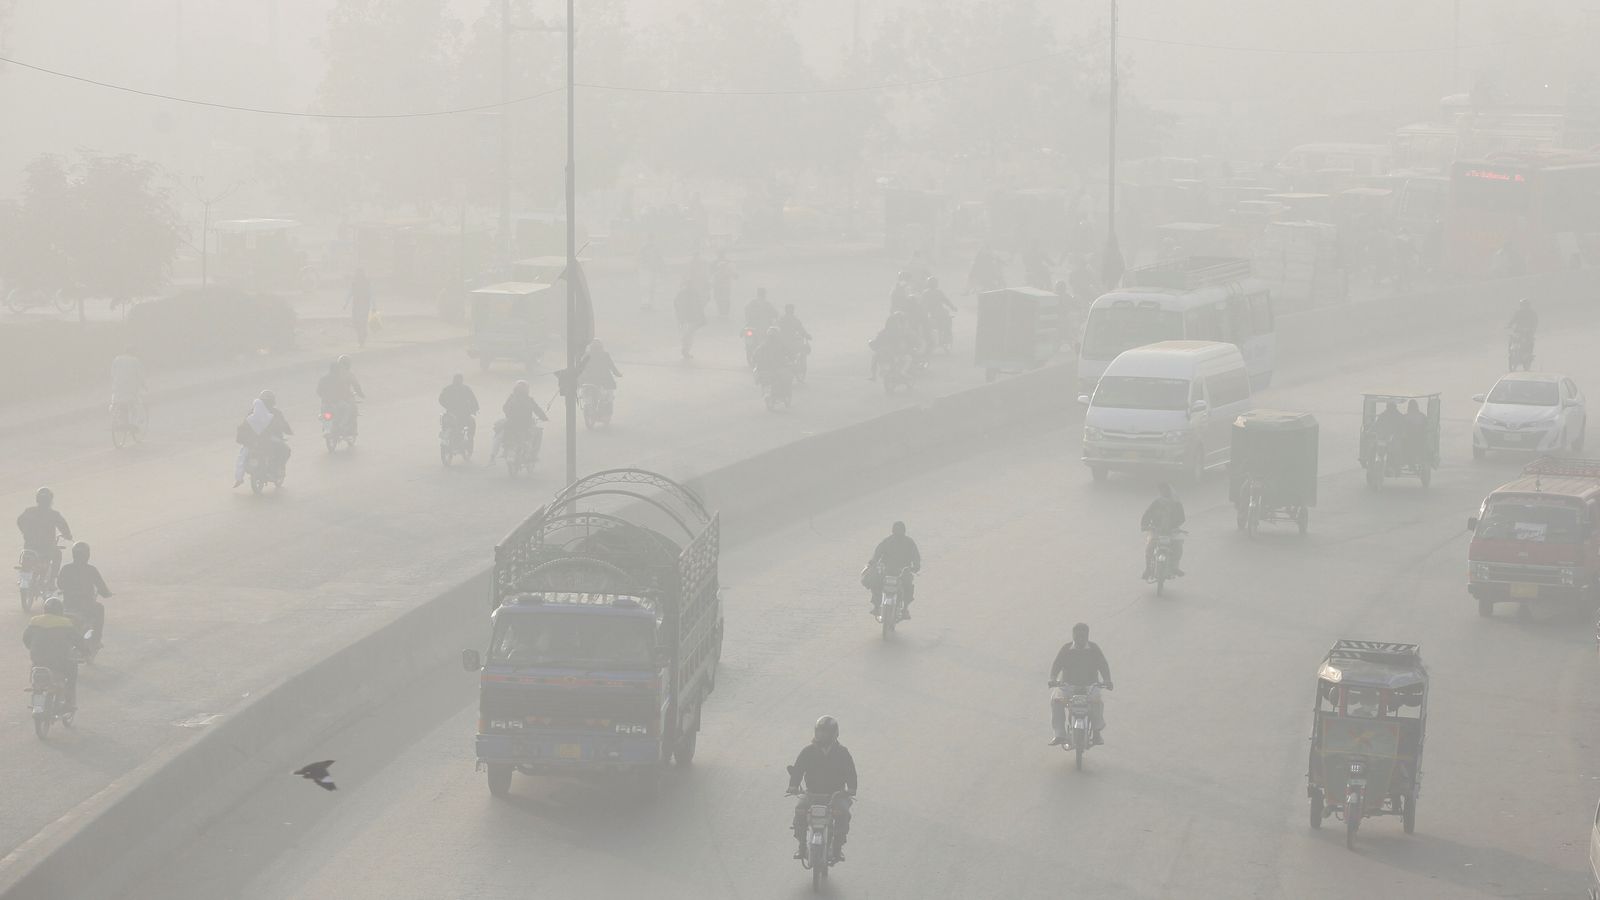 Pakistan uses artificial rain to battle smog for first time